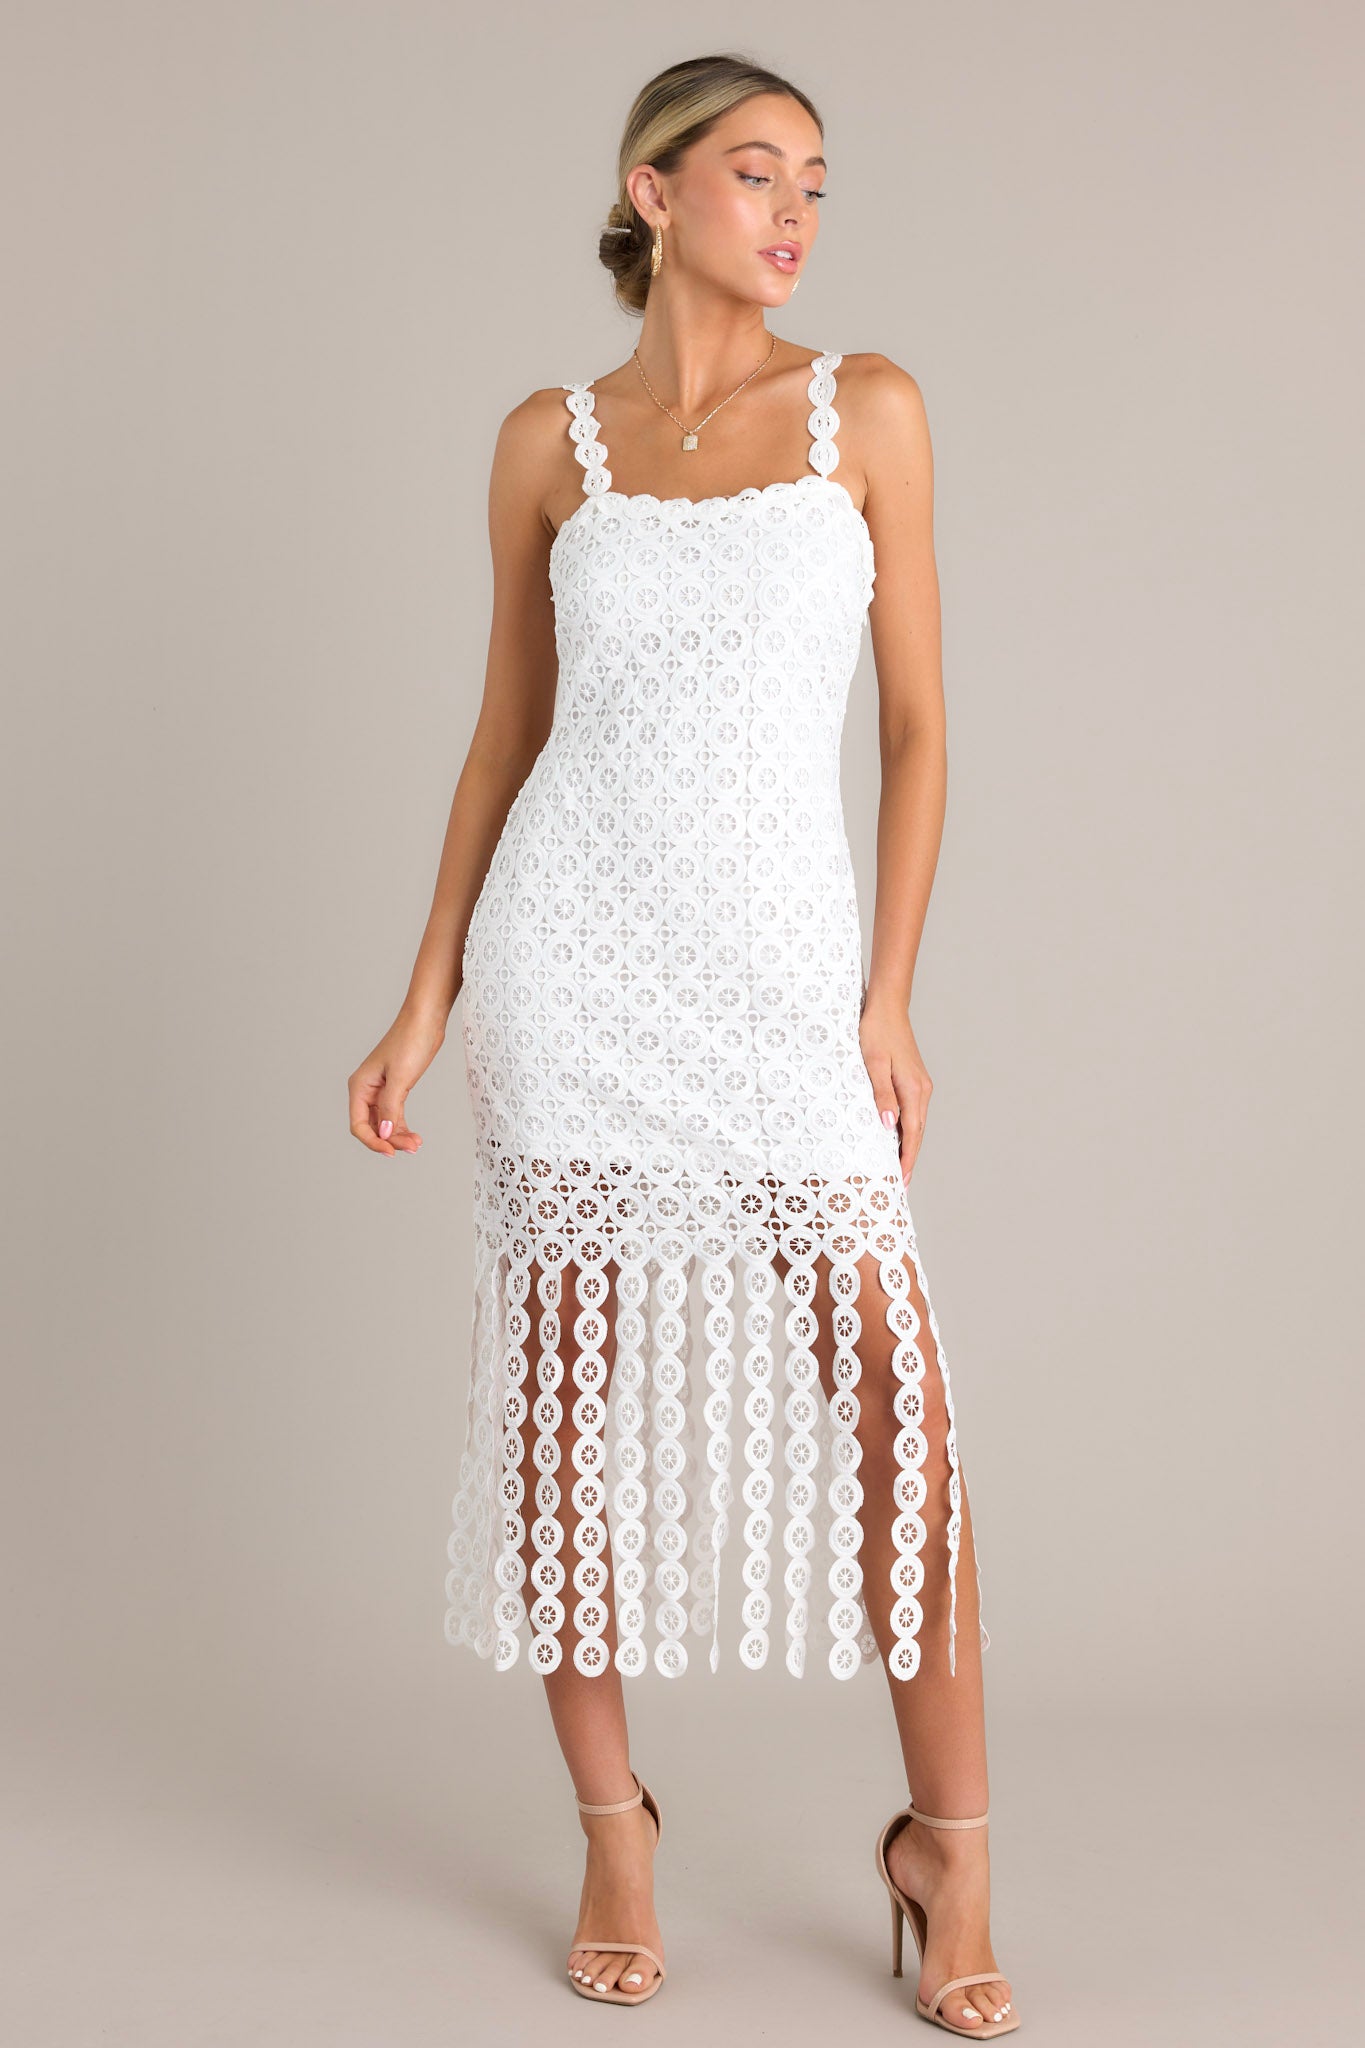 Front angled view of a white midi dress featuring a square neckline, detailed adjustable straps, a discrete side zipper, a unique lace pattern, and detailed hanging fringe